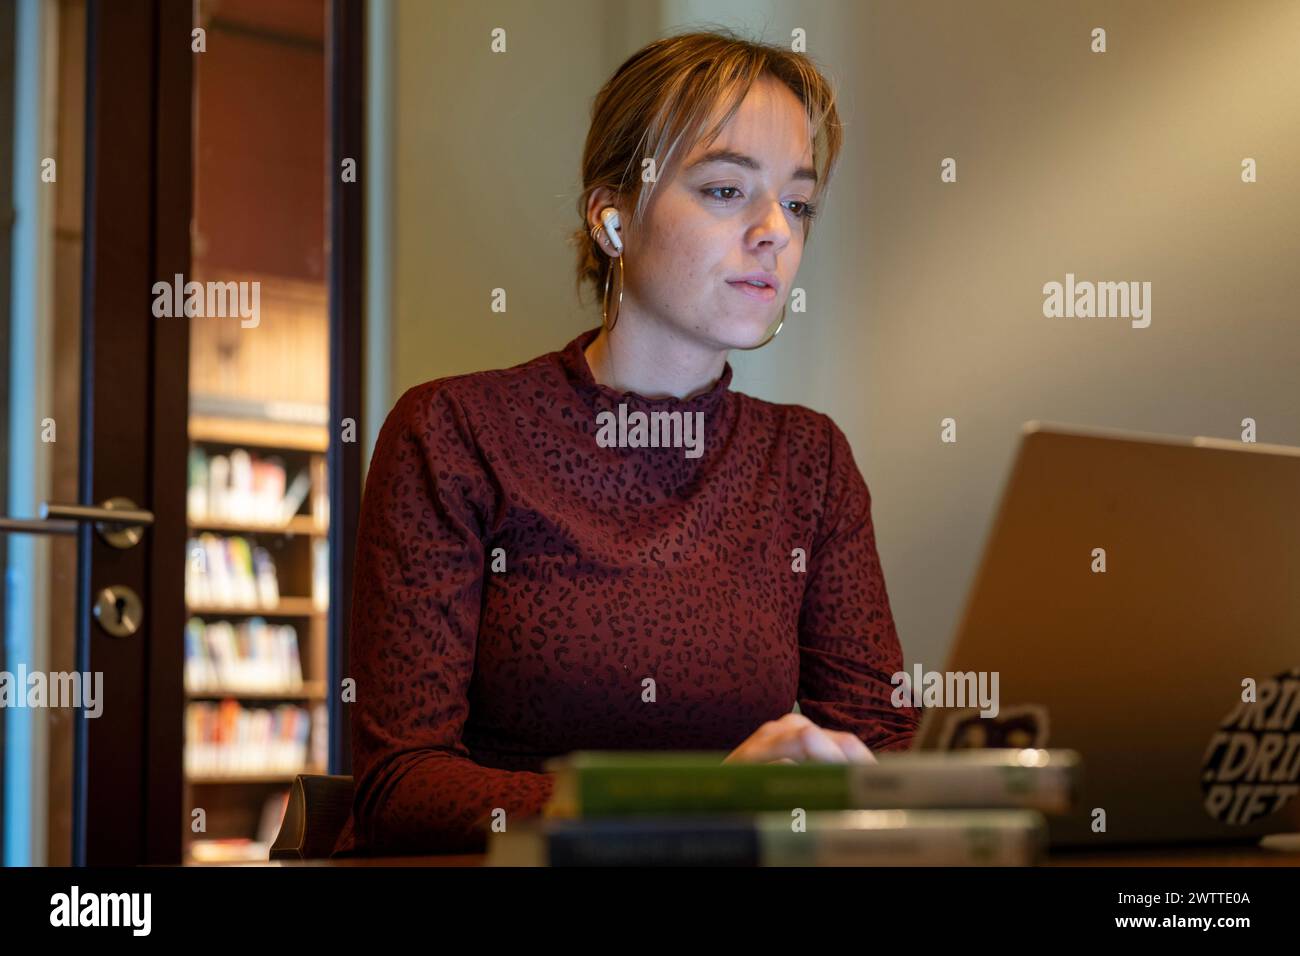 Young adult focused on working at a laptop in a cozy environment. Stock Photo